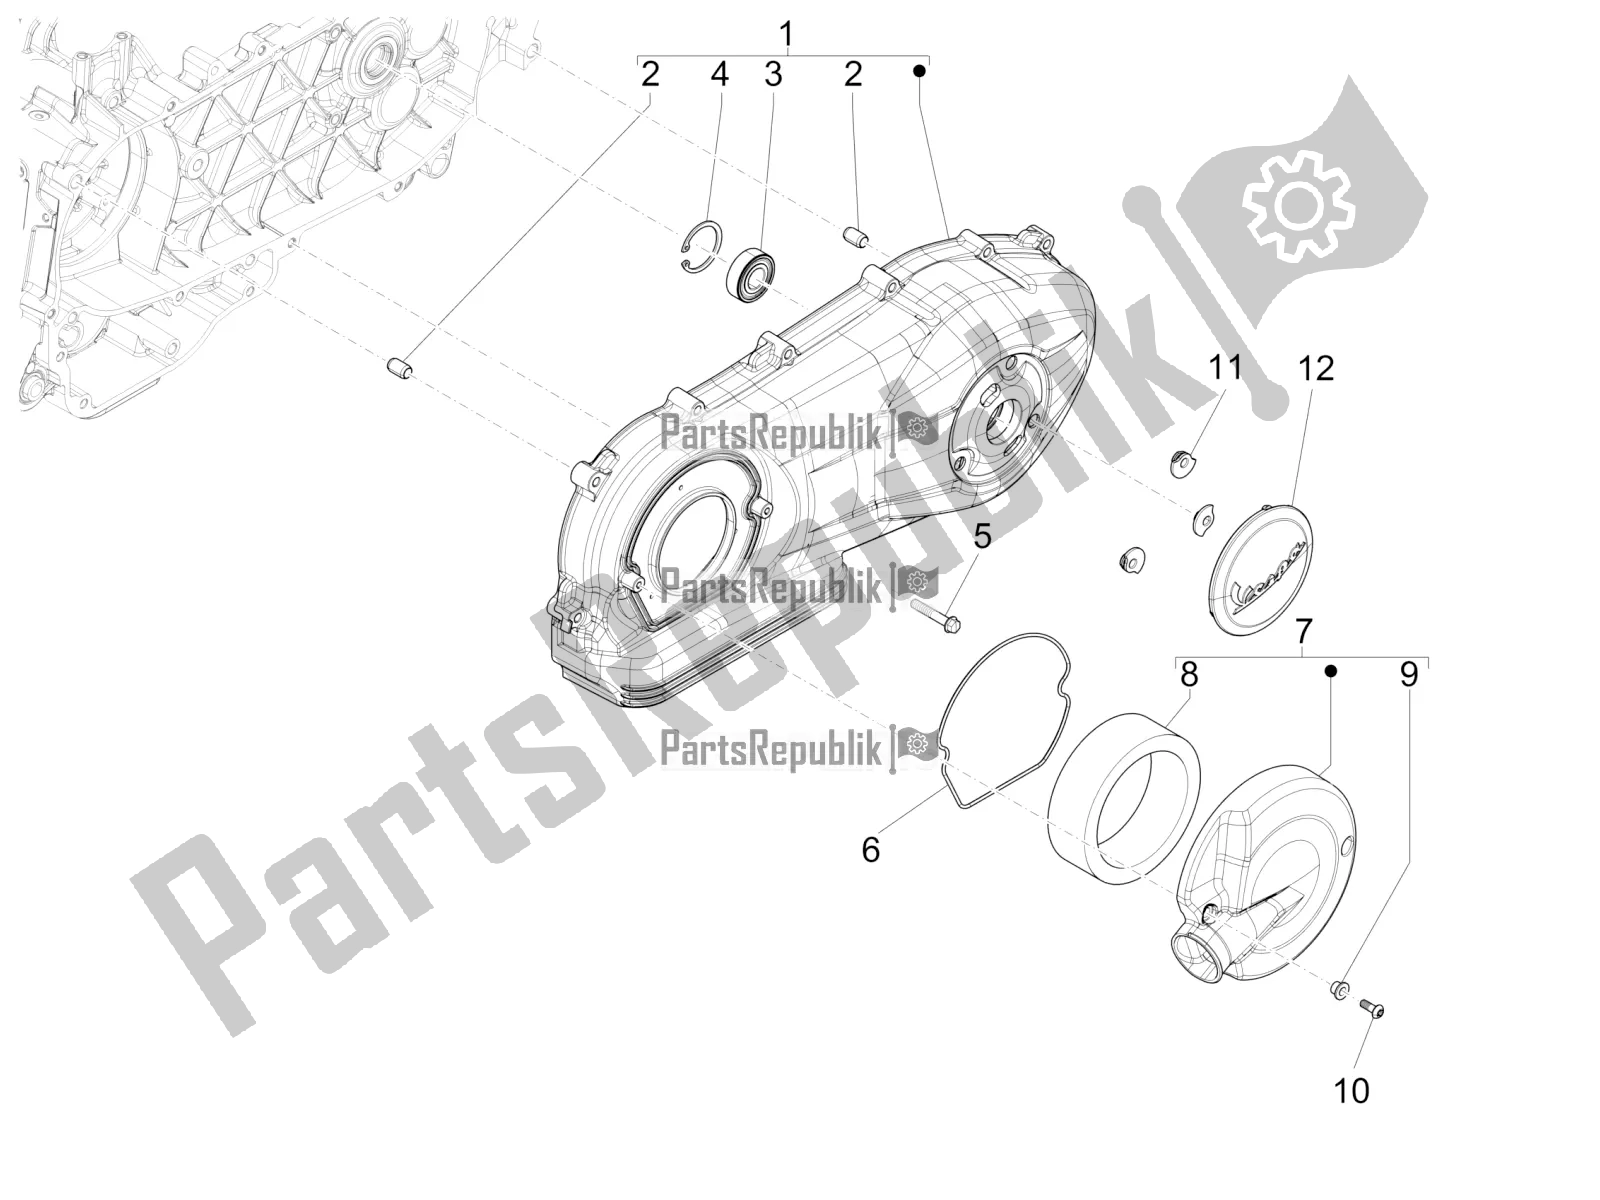 All parts for the Crankcase Cover - Crankcase Cooling of the Vespa 946 125 4 STR / Red 2018